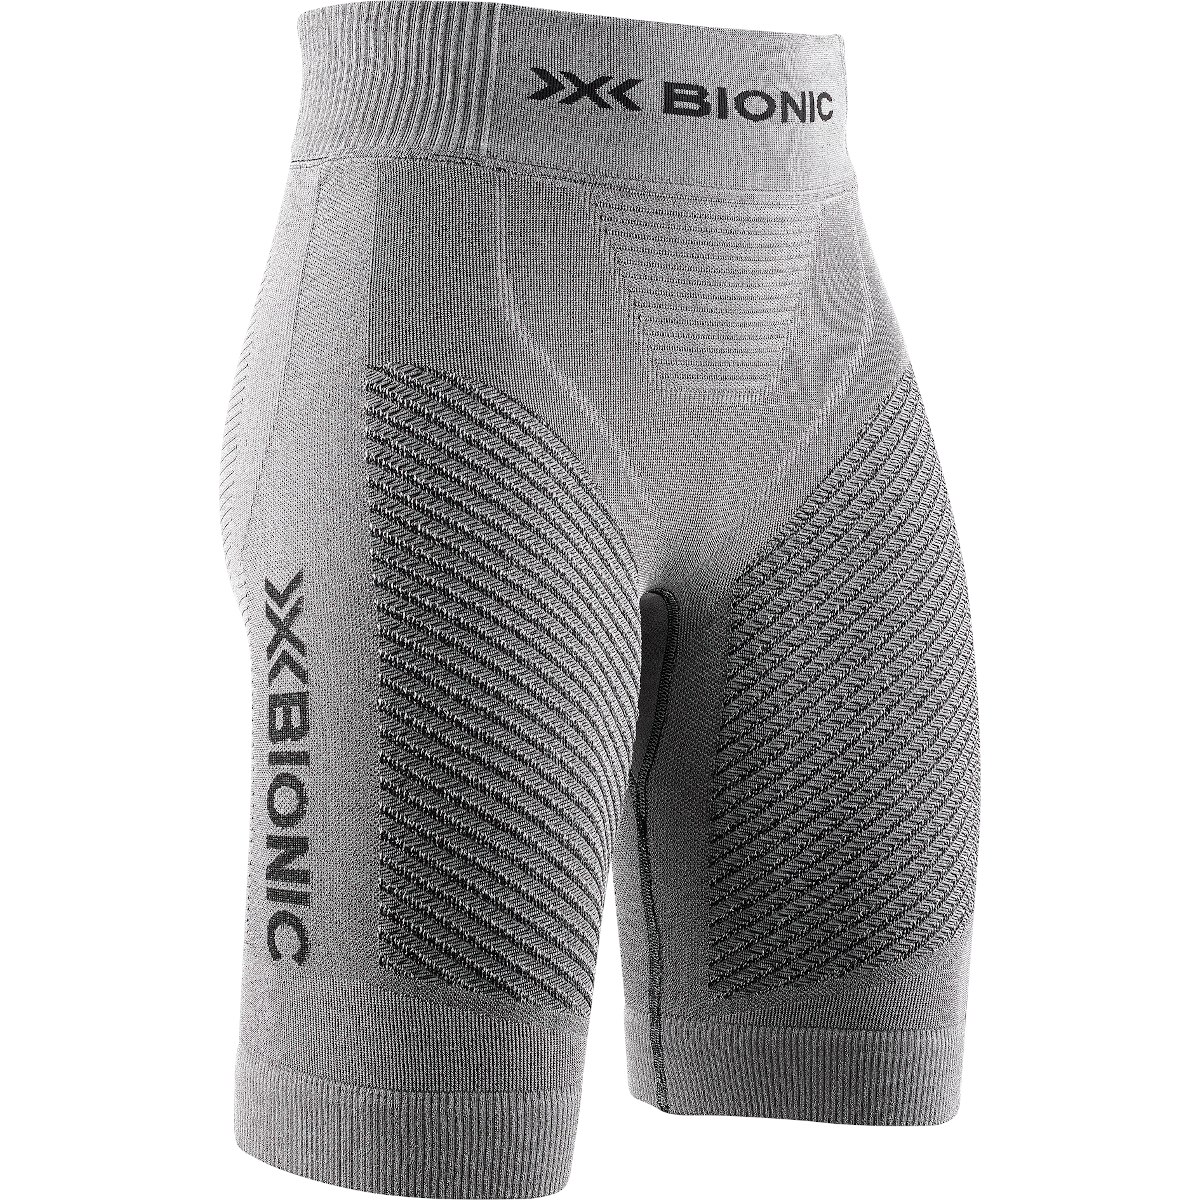 Picture of X-Bionic Fennec 4.0 Run Shorts for Women - anthracite/silver